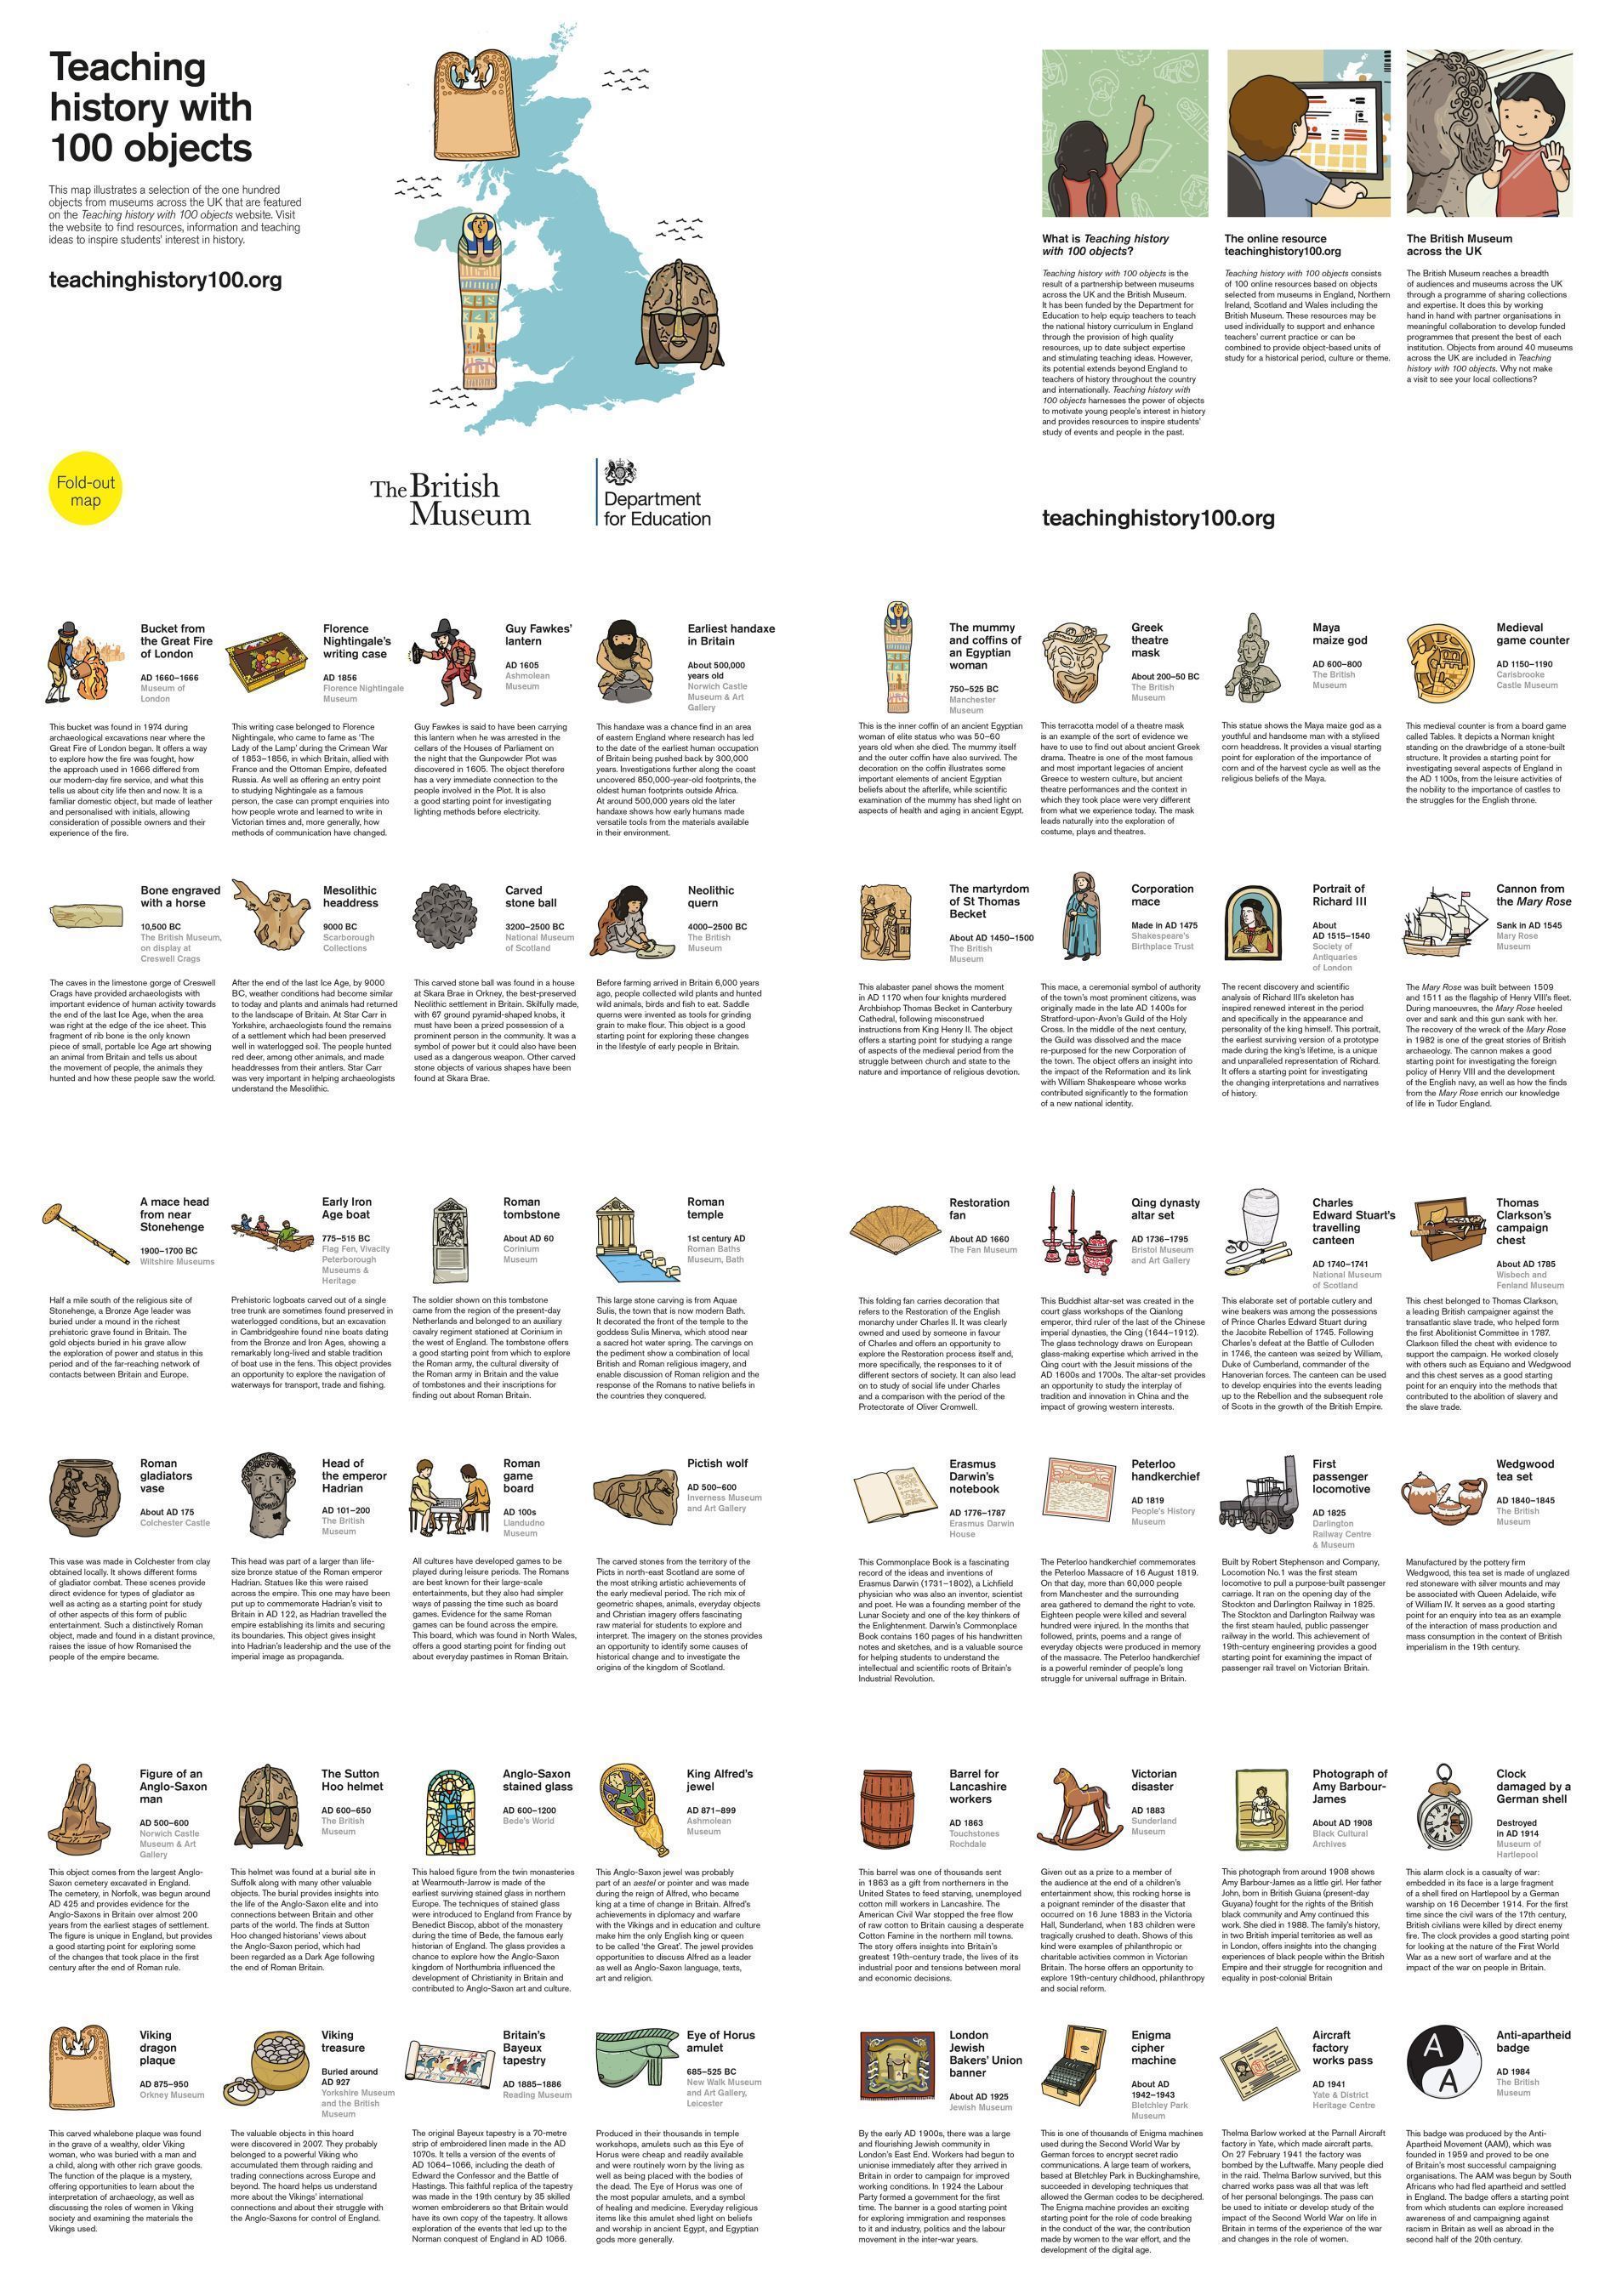 Teaching history with 100 objects, map resource showing objects from 40 museums across the UK. Â(C) The Trustees of the British Museum. (PRNewsFoto/TES Global)